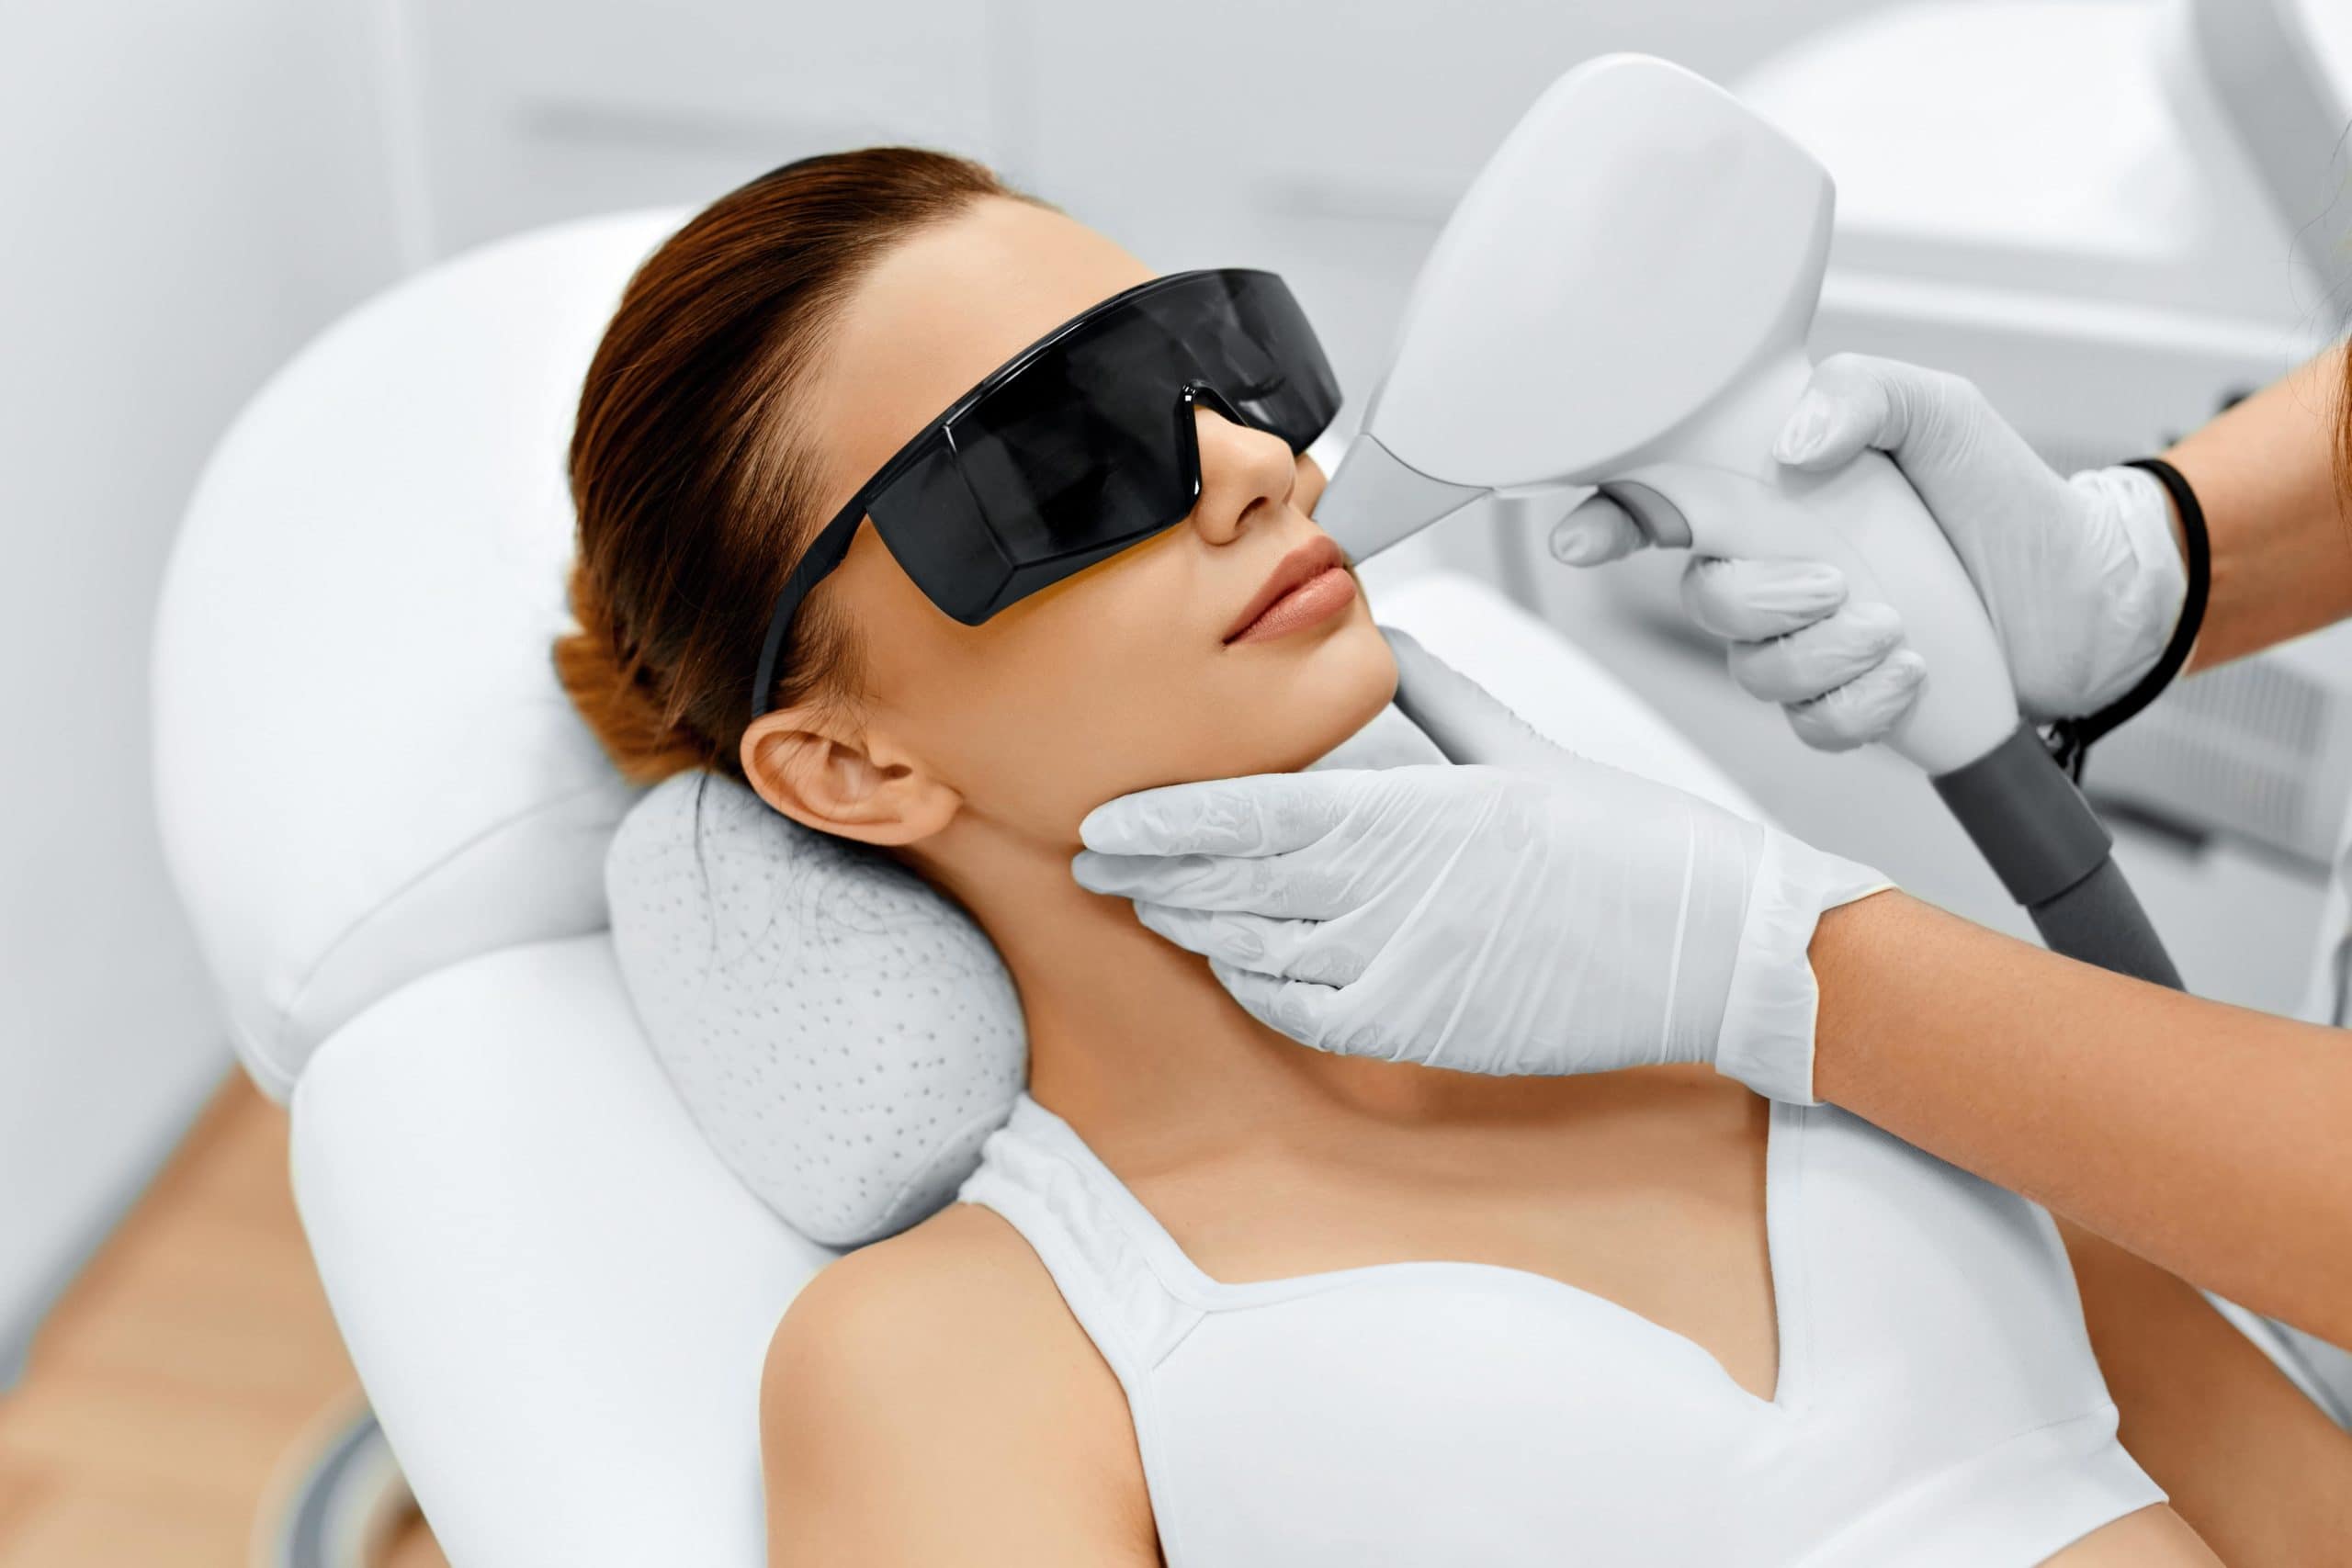 What are the Benefits of Laser Hair Removal